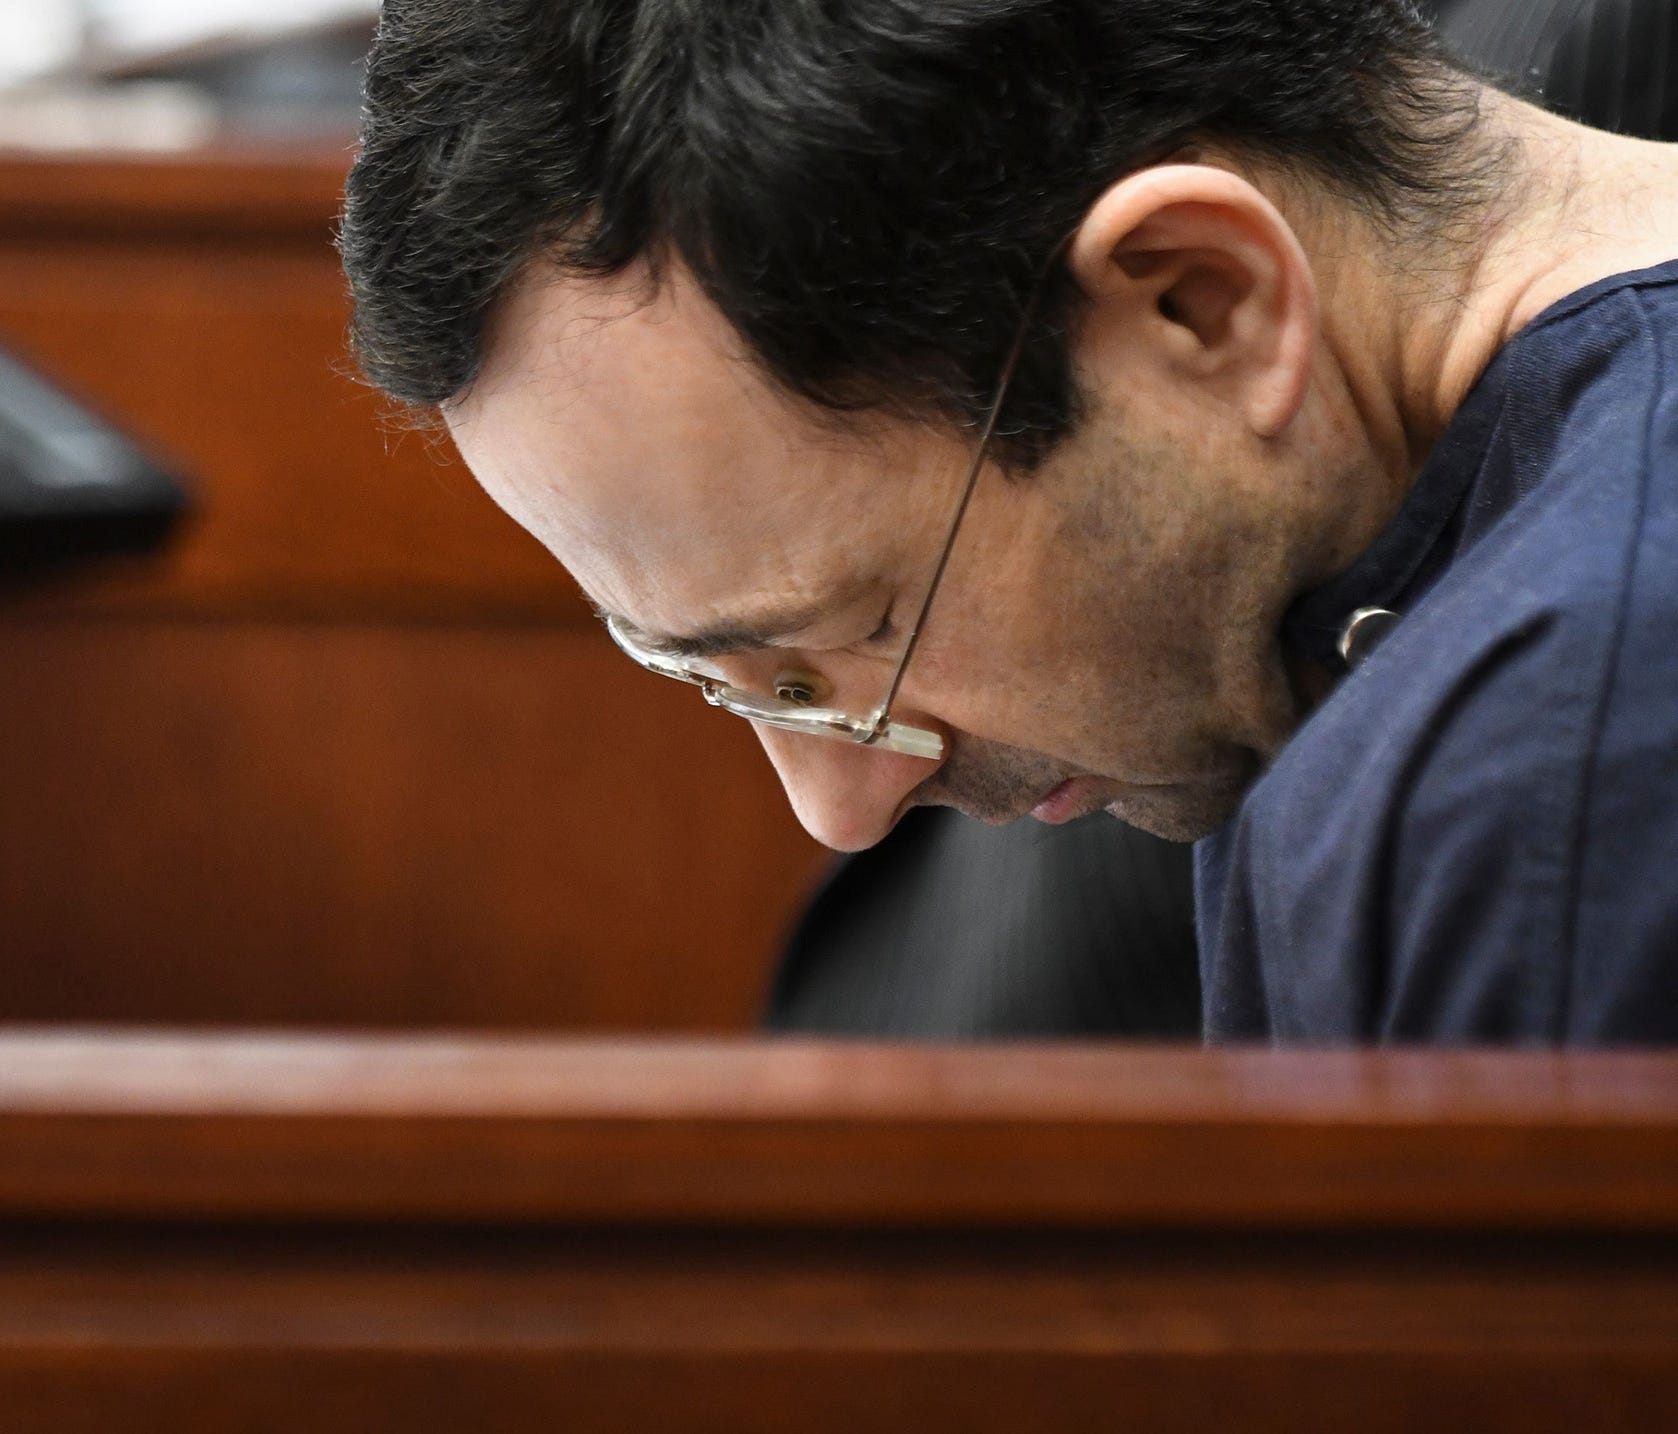 Larry Nassar hangs his head as former gymnast Amanda Thomashow gives her victim statement Tuesday, Jan. 23, 2018, during the sixth day of victim-impact statements in Ingham County (Mich.) Circuit Court.